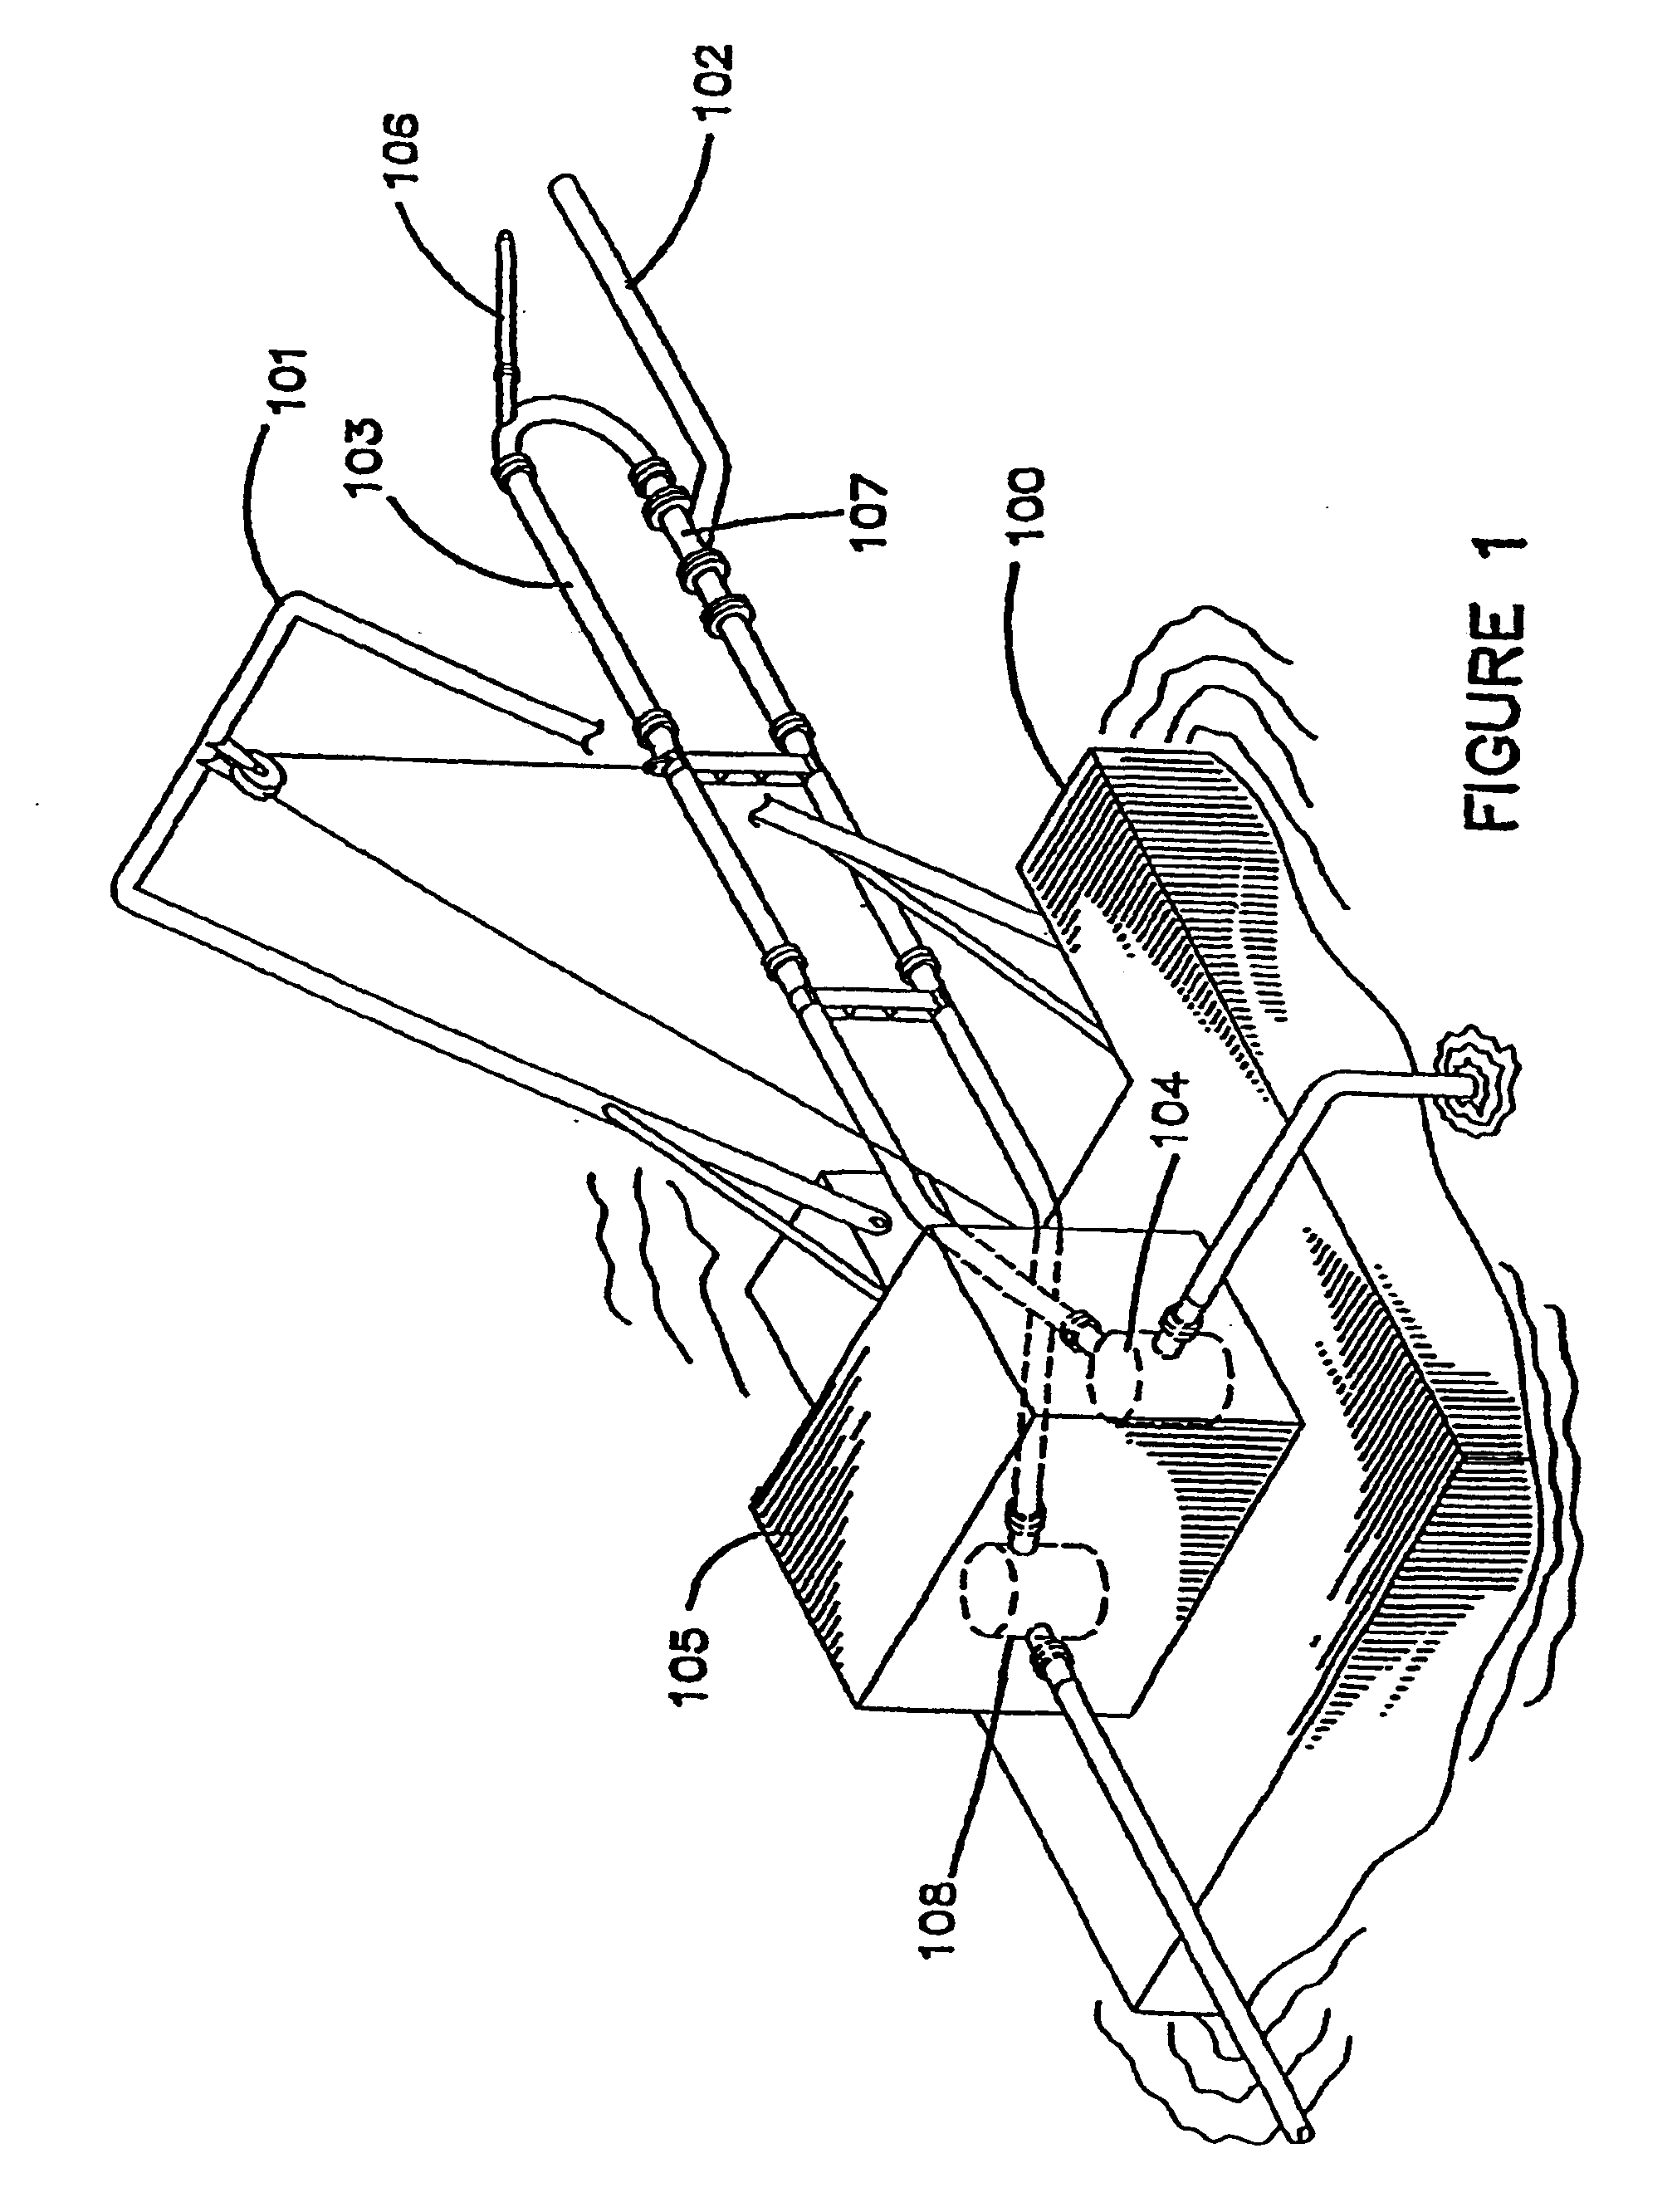 Excavation system employing a jet pump